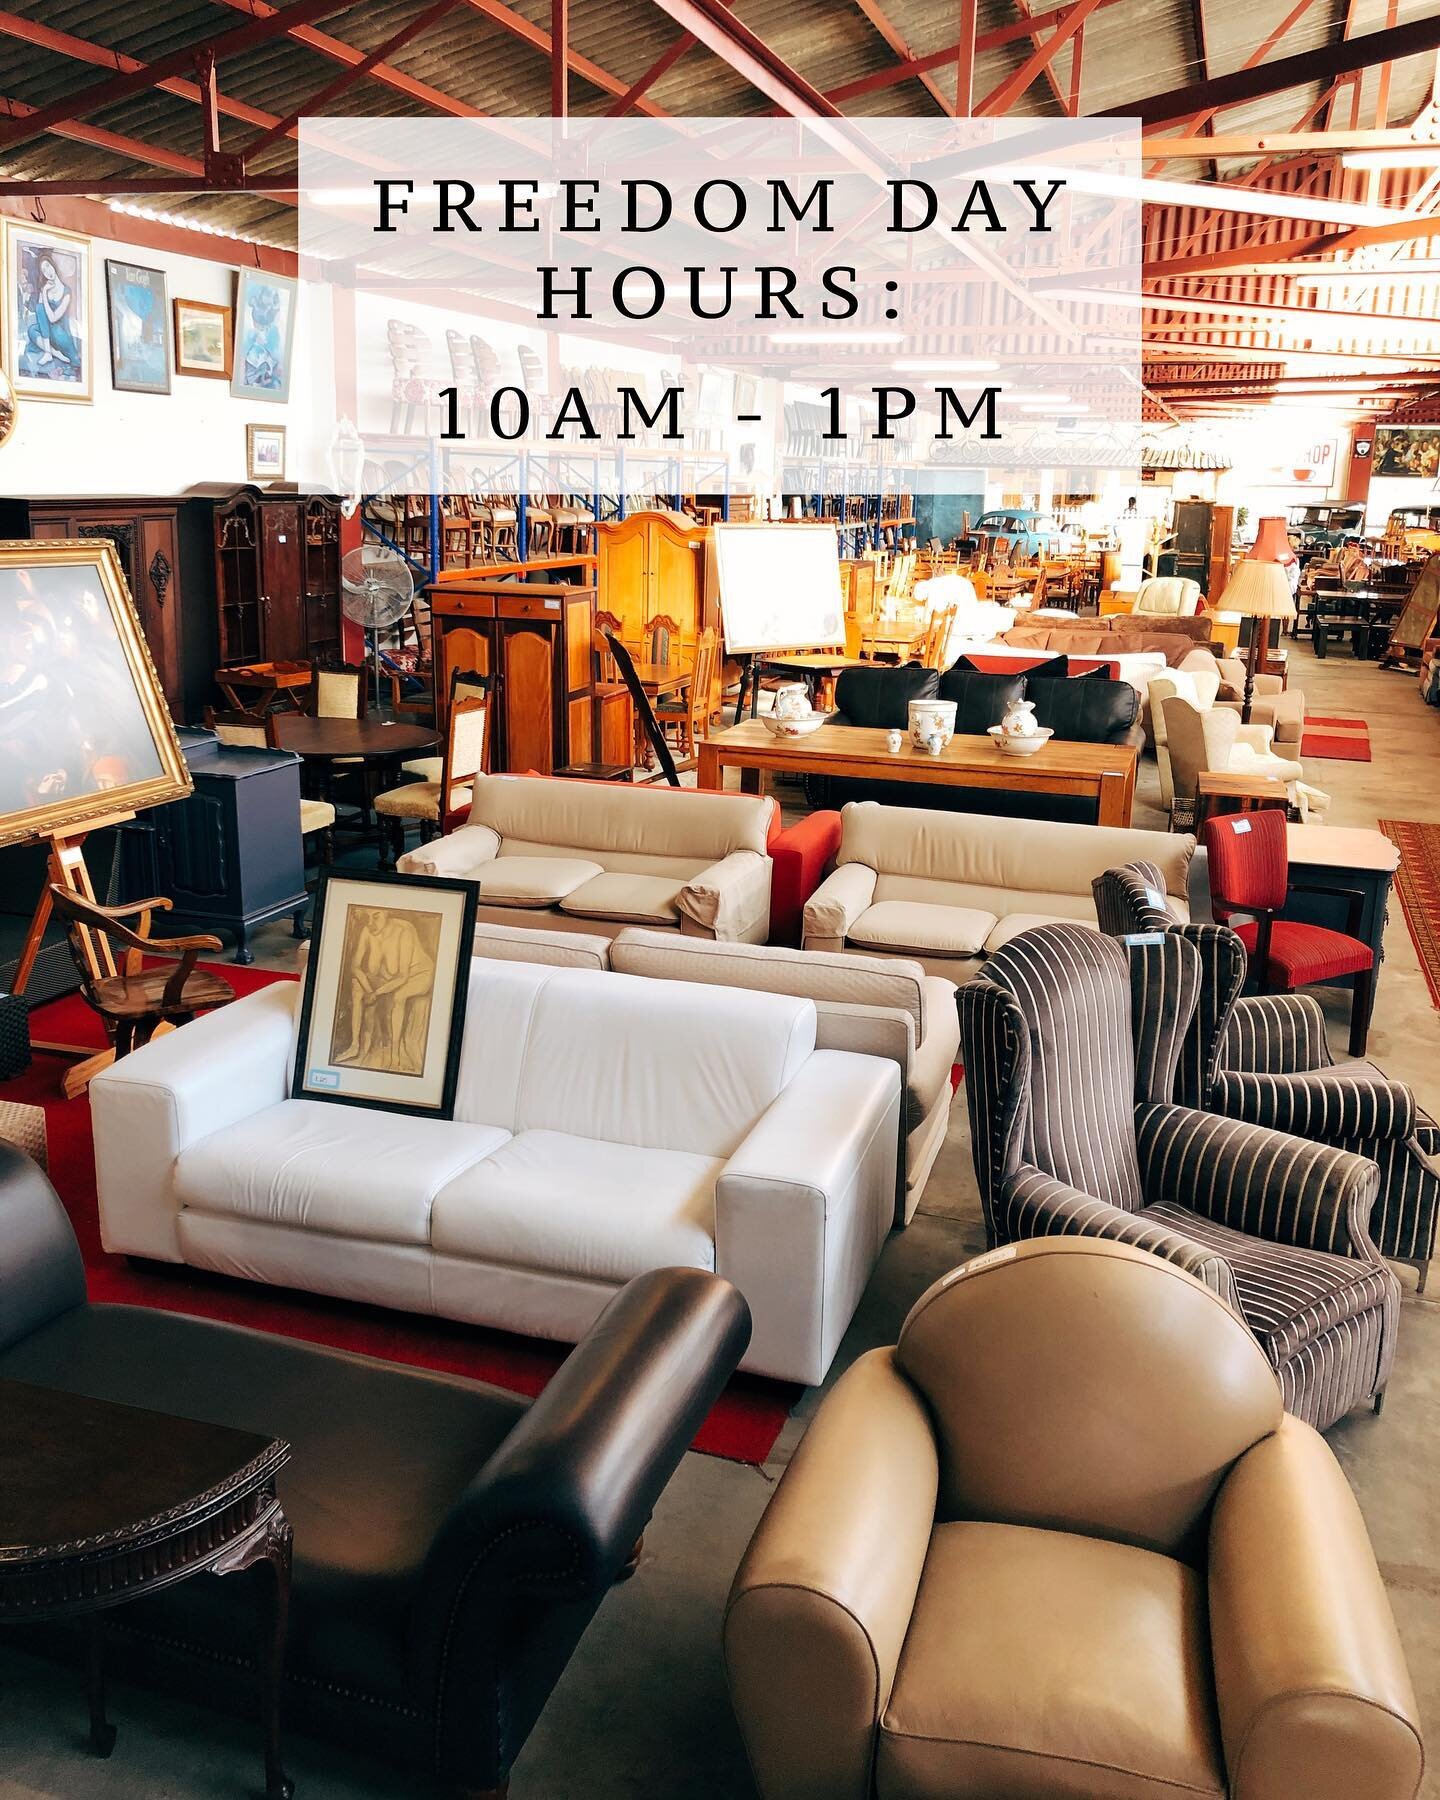 We&rsquo;ll be open tomorrow (Tues 27 April) for Freedom Day from 10am - 1pm. Stop by for a coffee &amp; a browse 😁
.
.
.
.
.
.
.
.
.
#diehandelshuis #antique #antiques #furniture #secondhandfurniture #interiors #decor #interiordesign #home